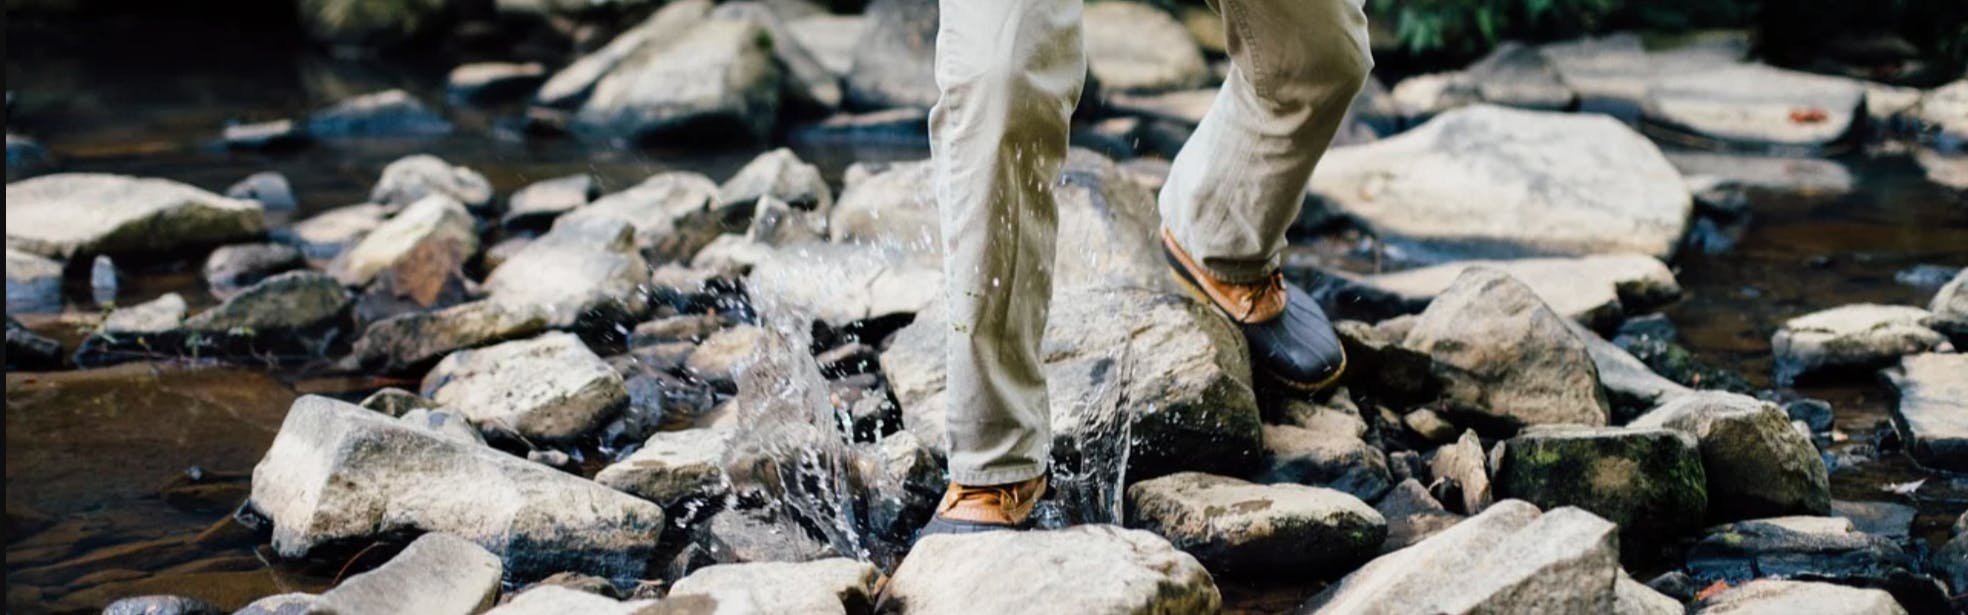 Someone in pants and duck boots crosses a stream. One of their feet splashes in the water.